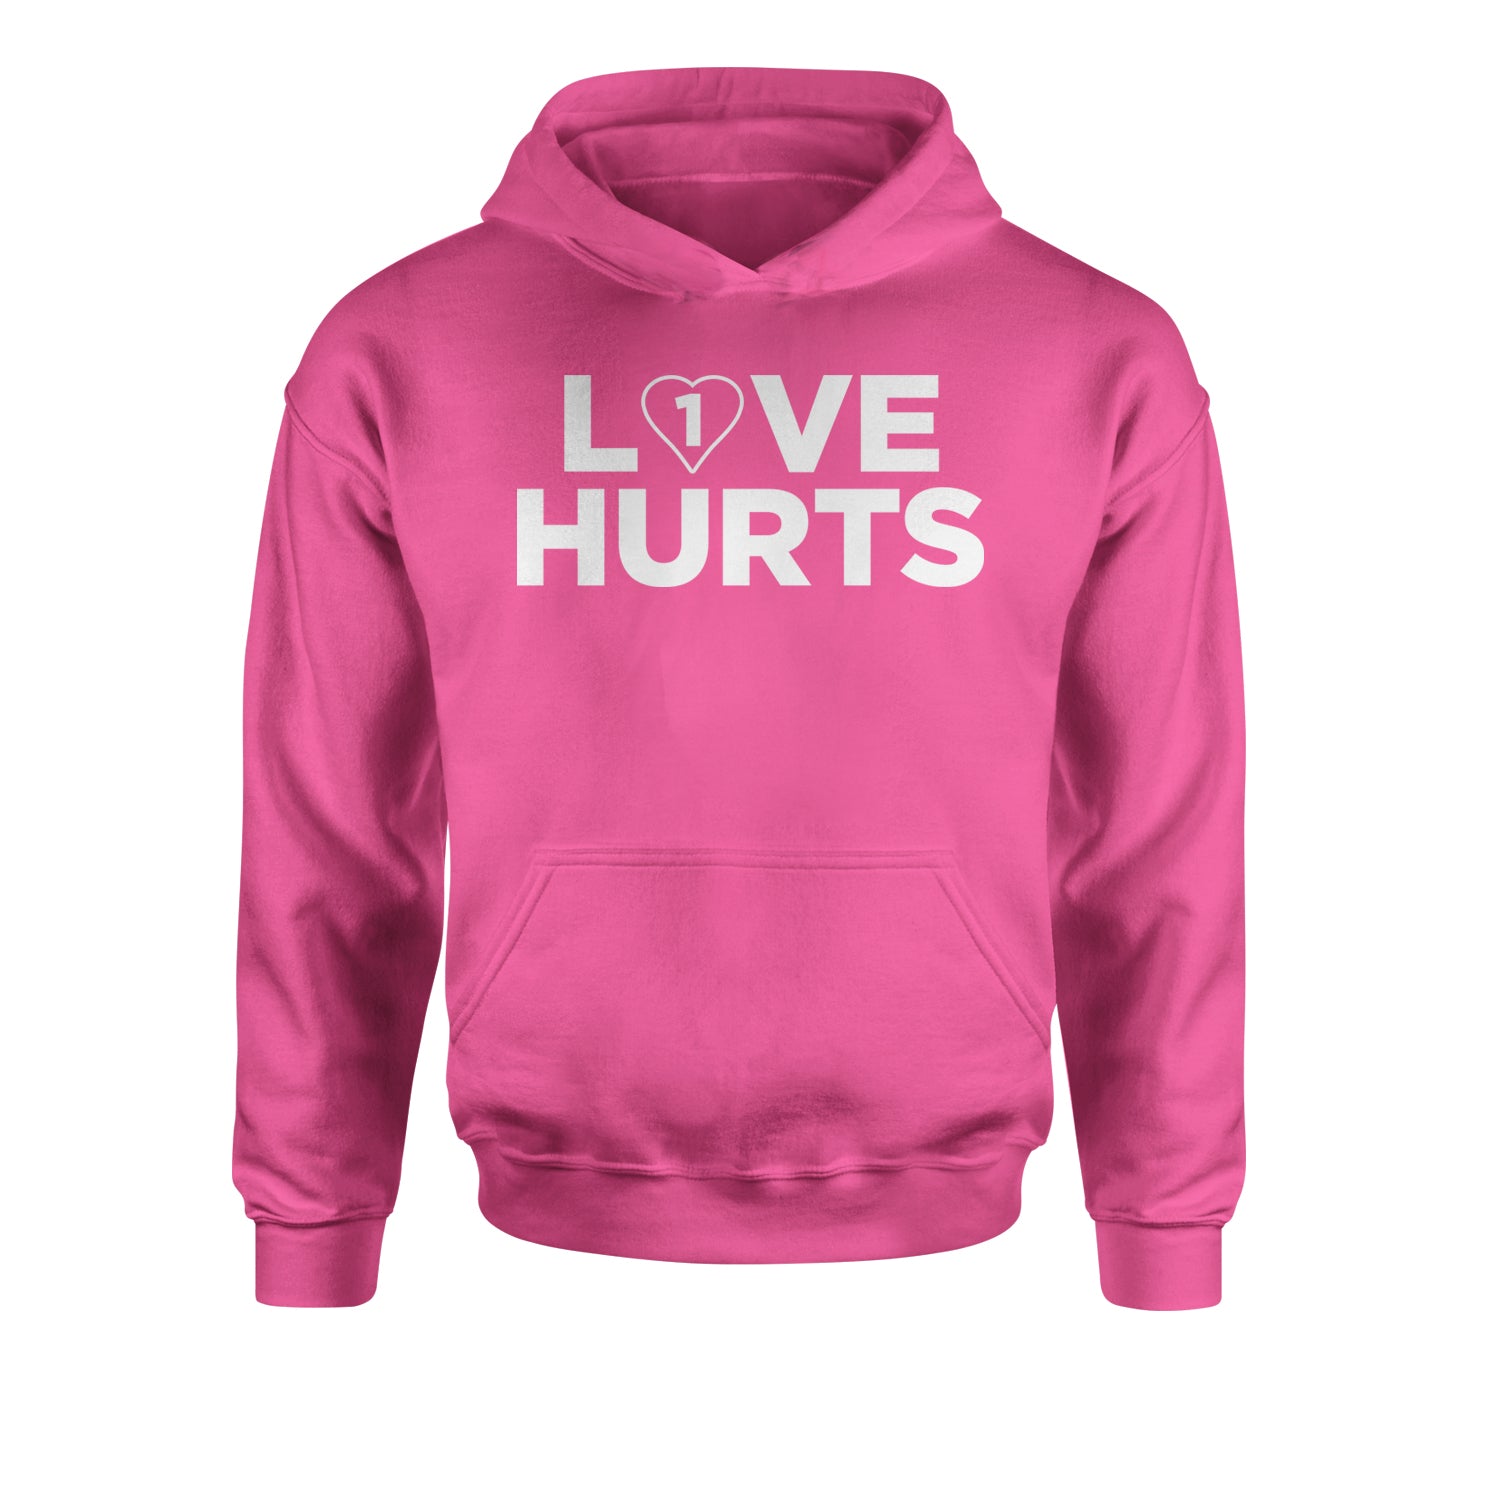 Love Hurts Philadelphia Youth-Sized Hoodie birds, football, go, philly by Expression Tees